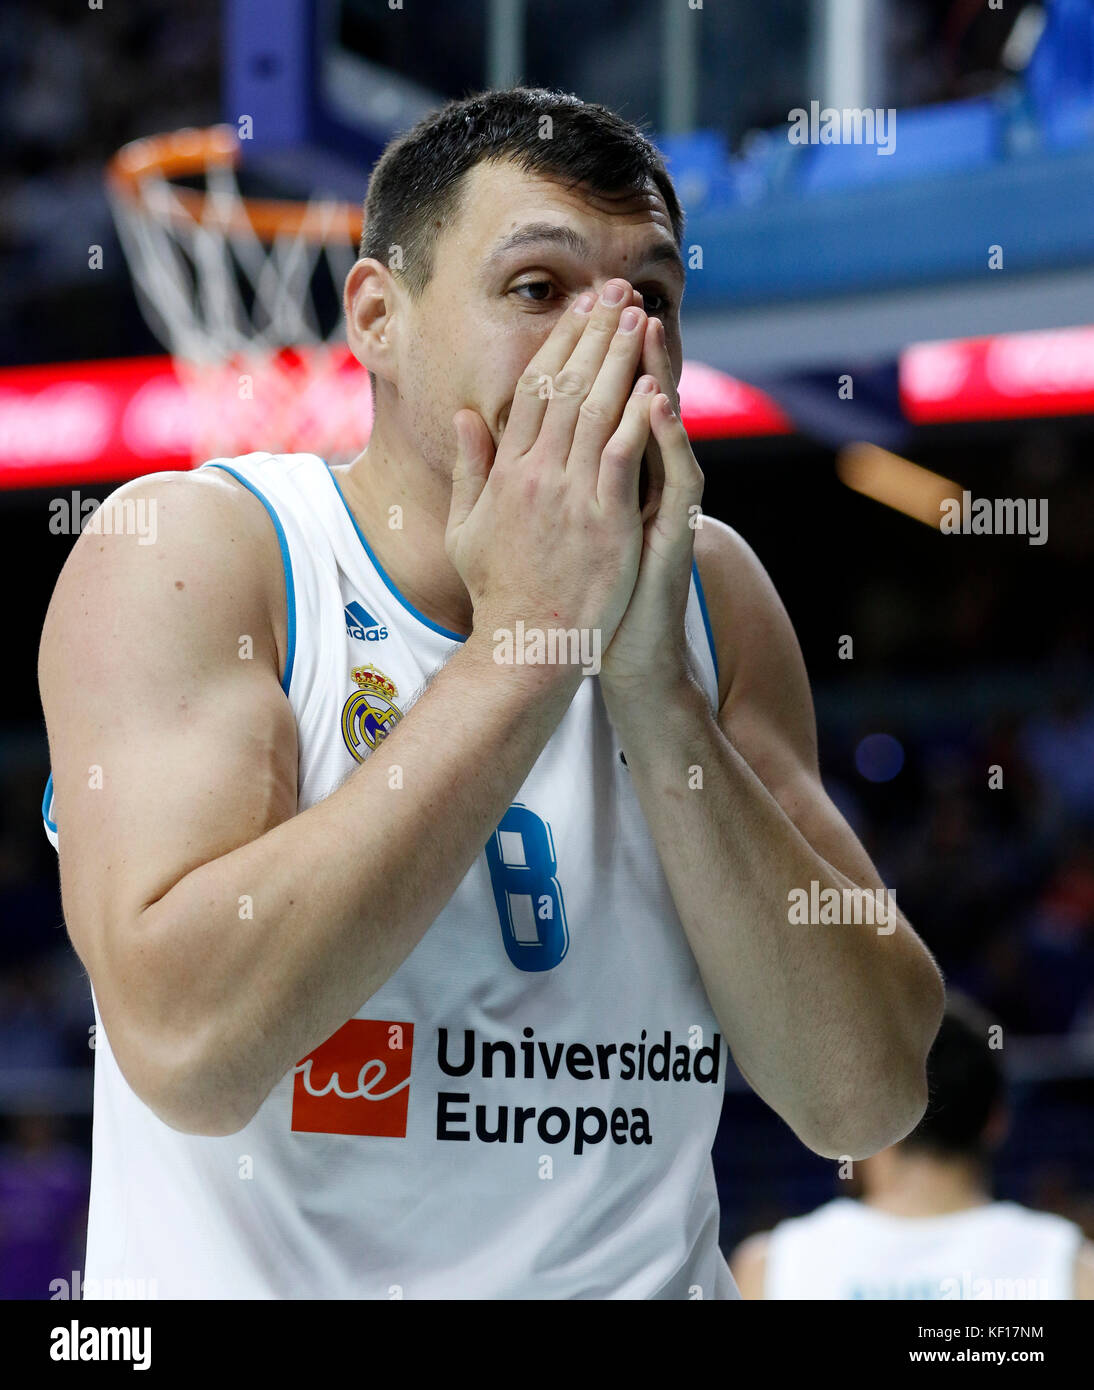 Maciulis during the match Real Madrid vs Milan corresponding to basketball Euroleague, in Madrid, on Tuesday 23th October, 2017. Credit: Gtres Información más Comuniación on line, S.L./Alamy Live News Stock Photo